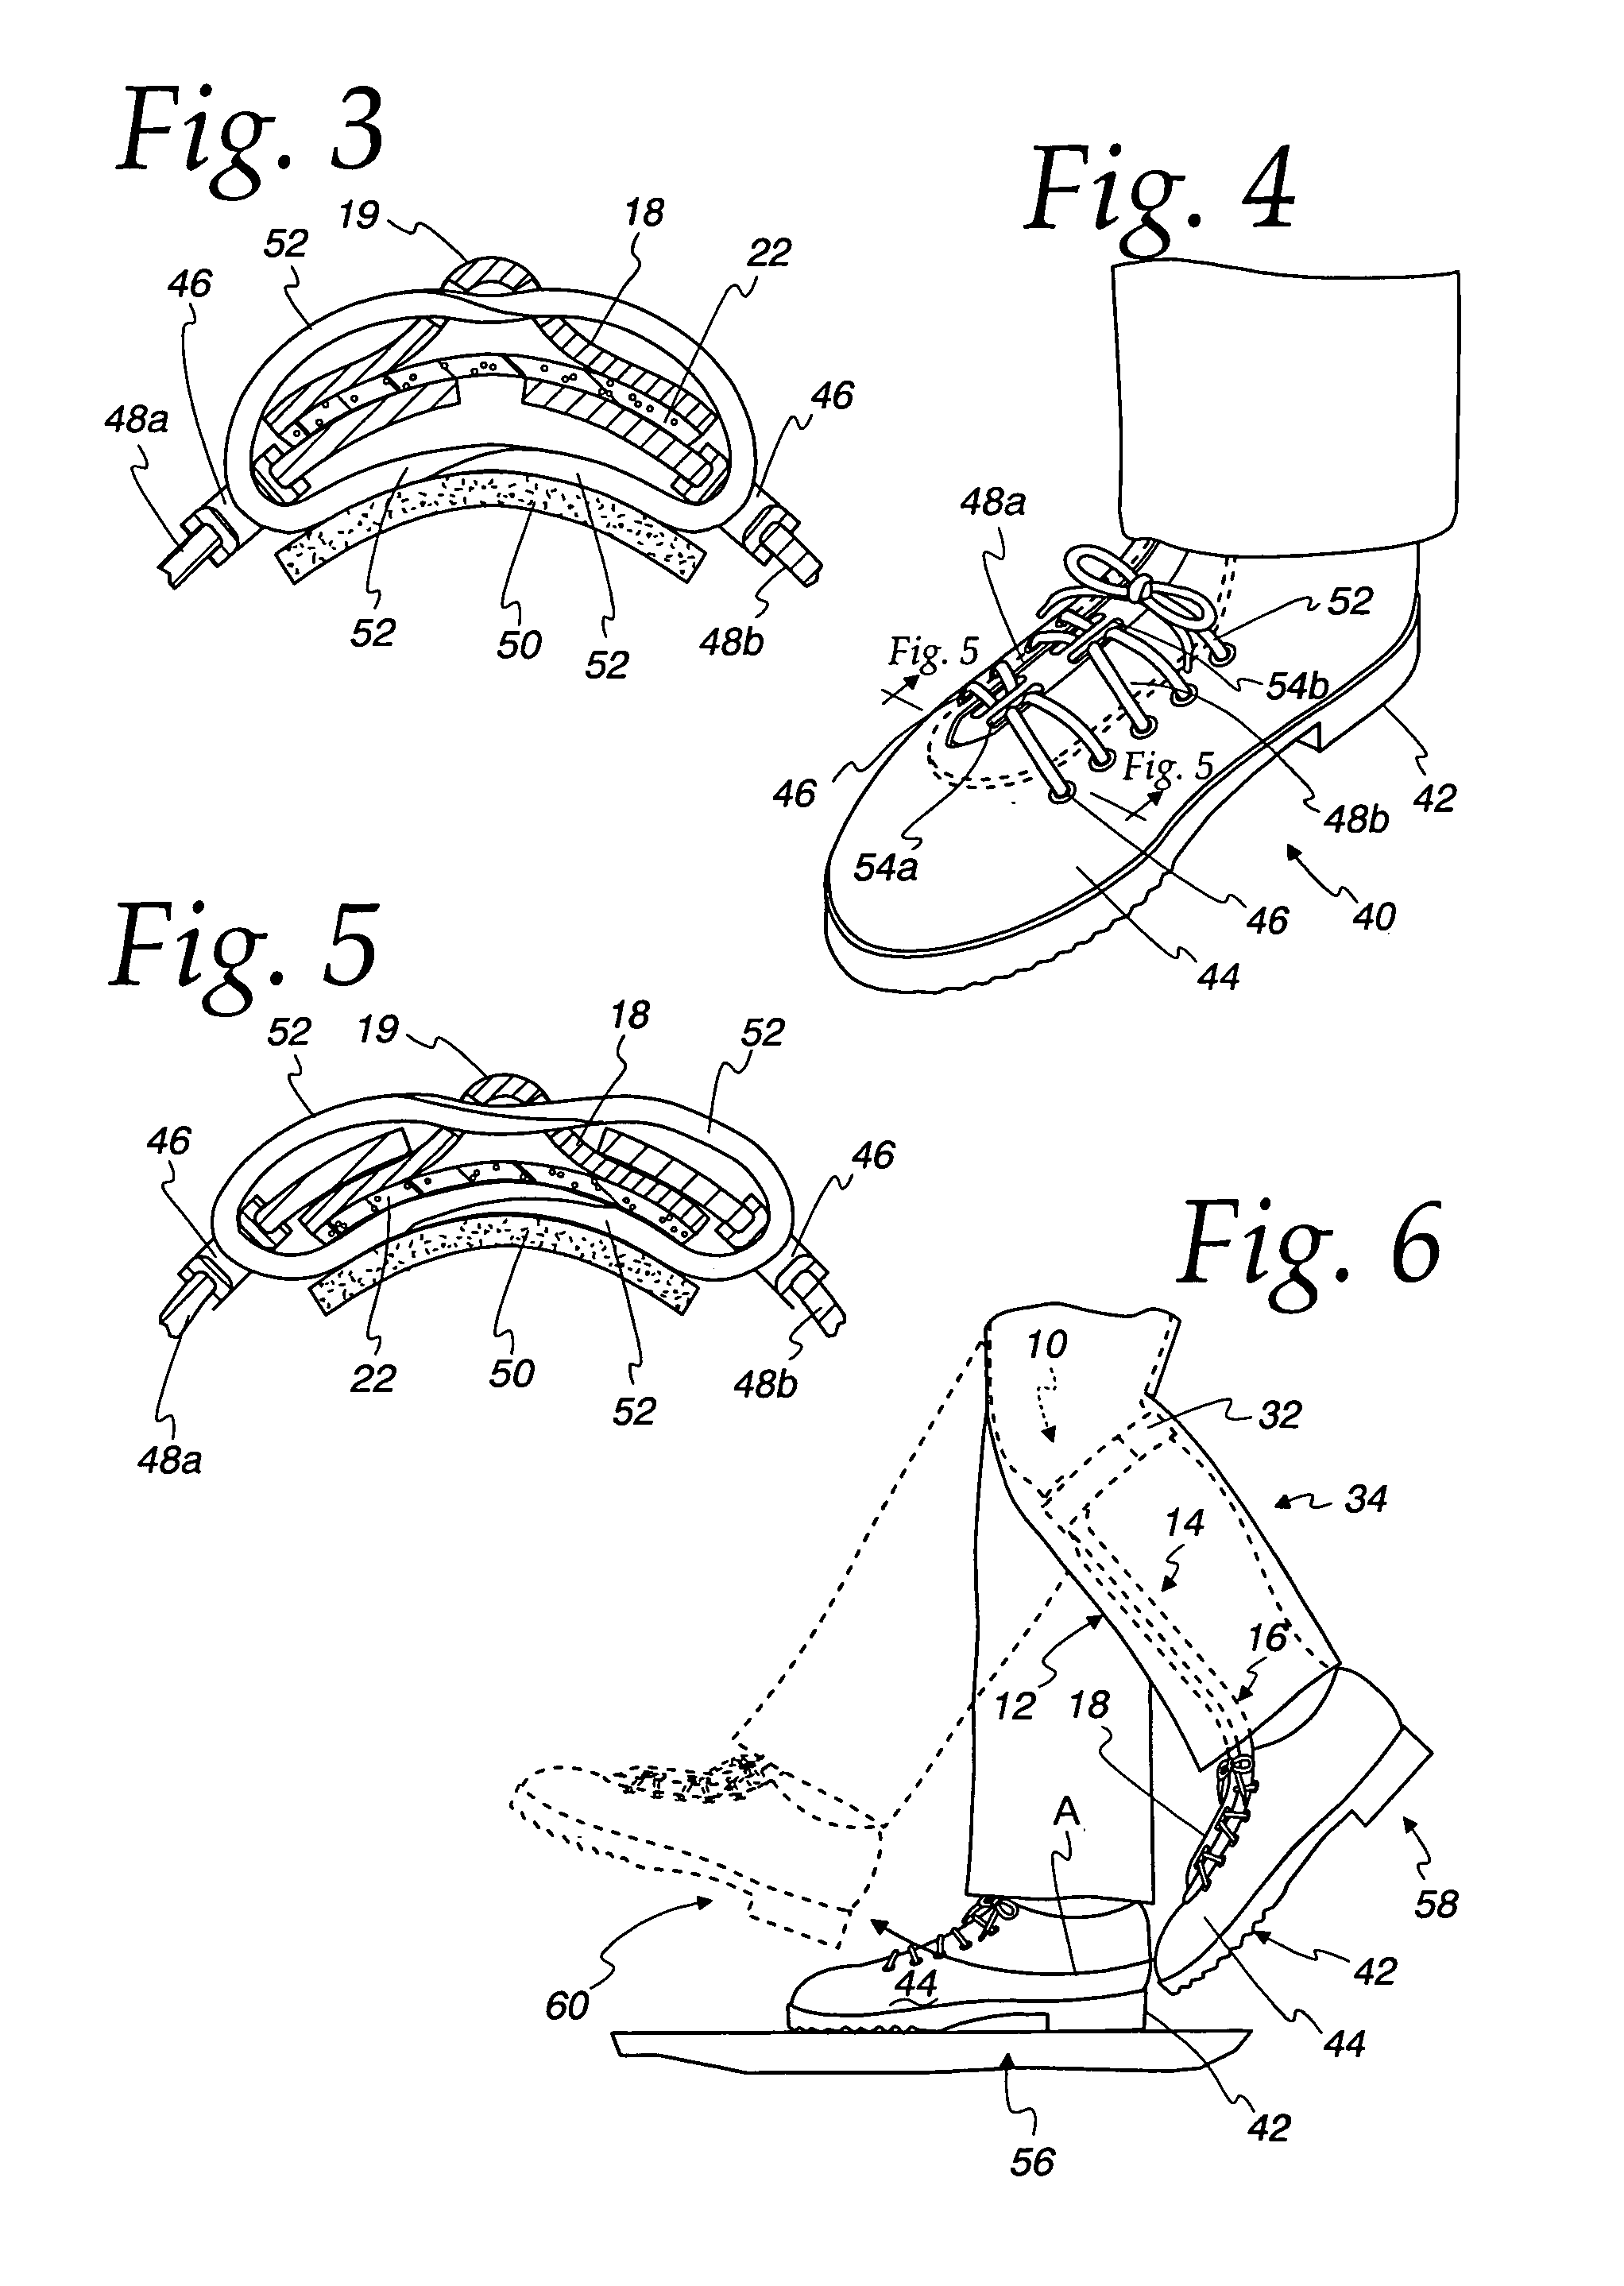 Ankle-foot orthotic device and method